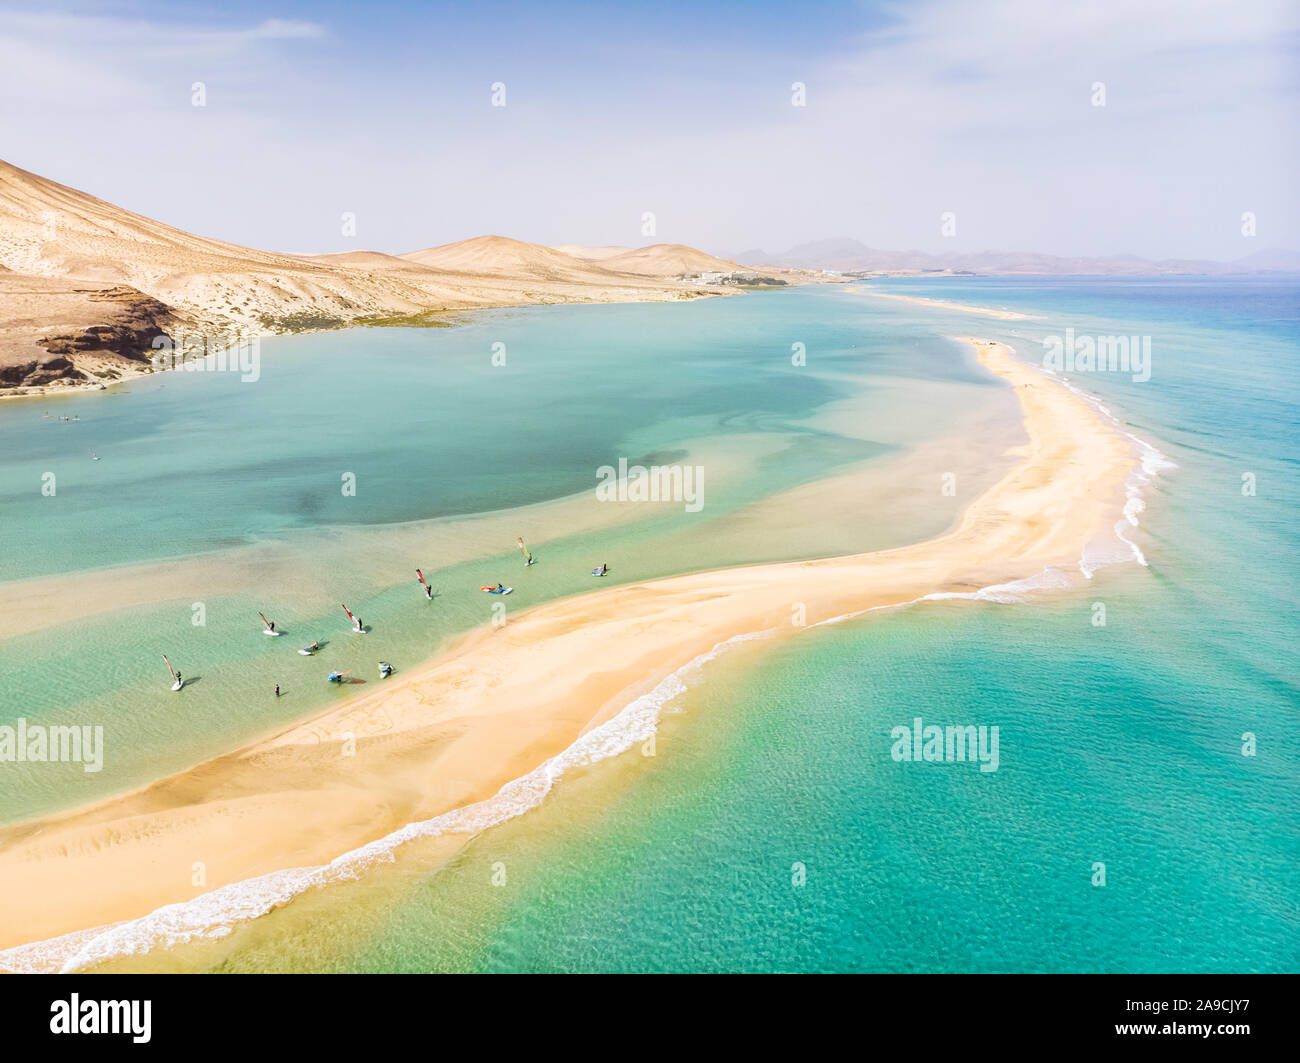 Aerial view of beach in Fuerteventura island with windsurfers learning windsurfing in blue turquoise water during summer vacation holidays, Canary isl Stock Photo